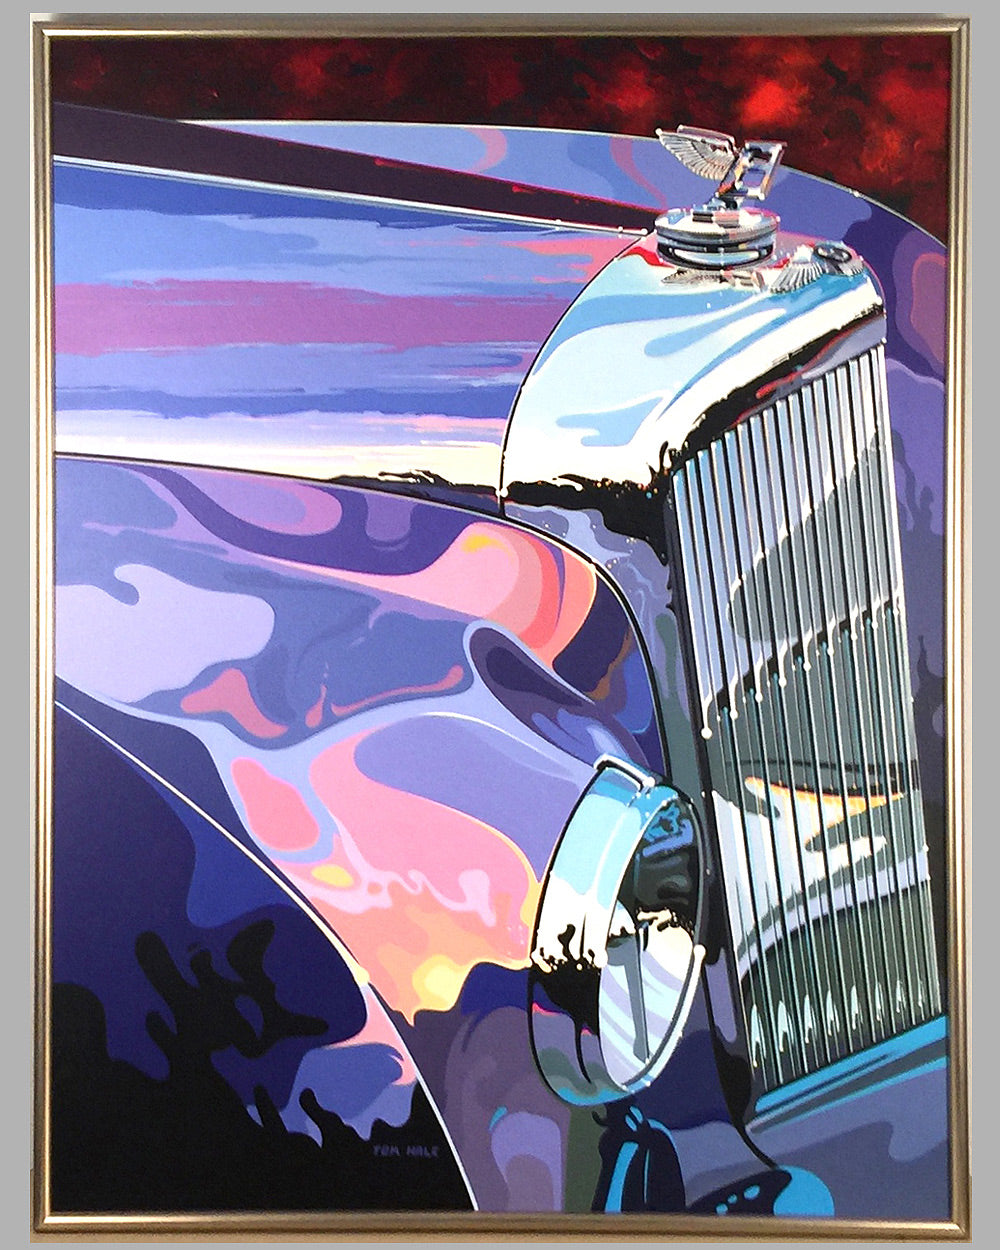 Bentley grill painting by Tom Hale, U.S.A.